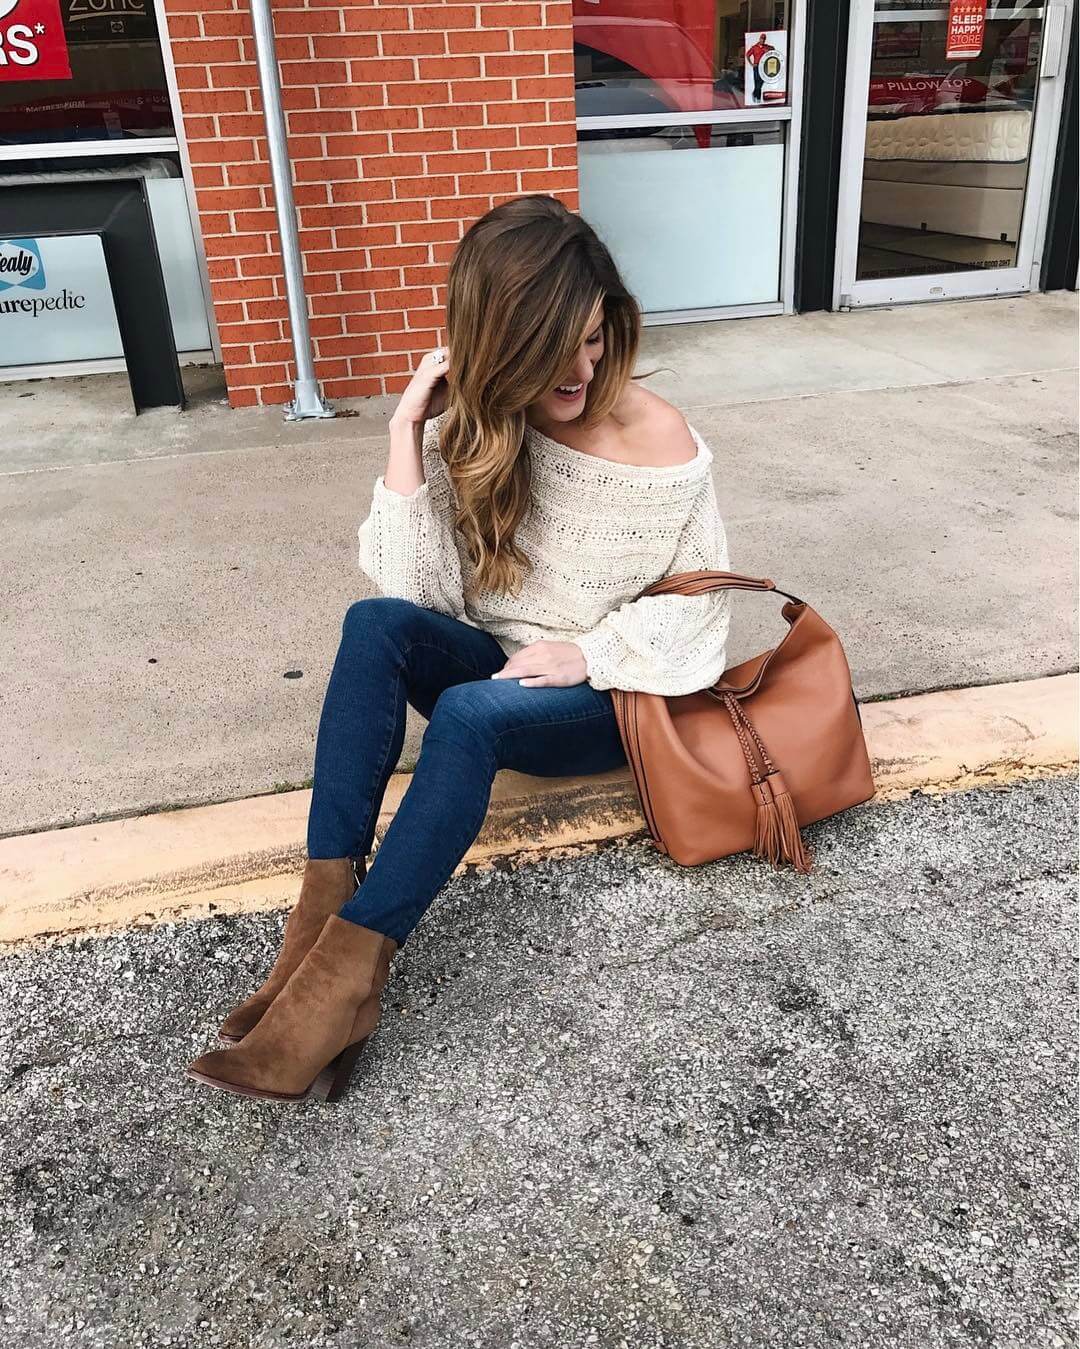 brighton the day styling jeans, bootie, hobo bag, and off the shoulder sweater